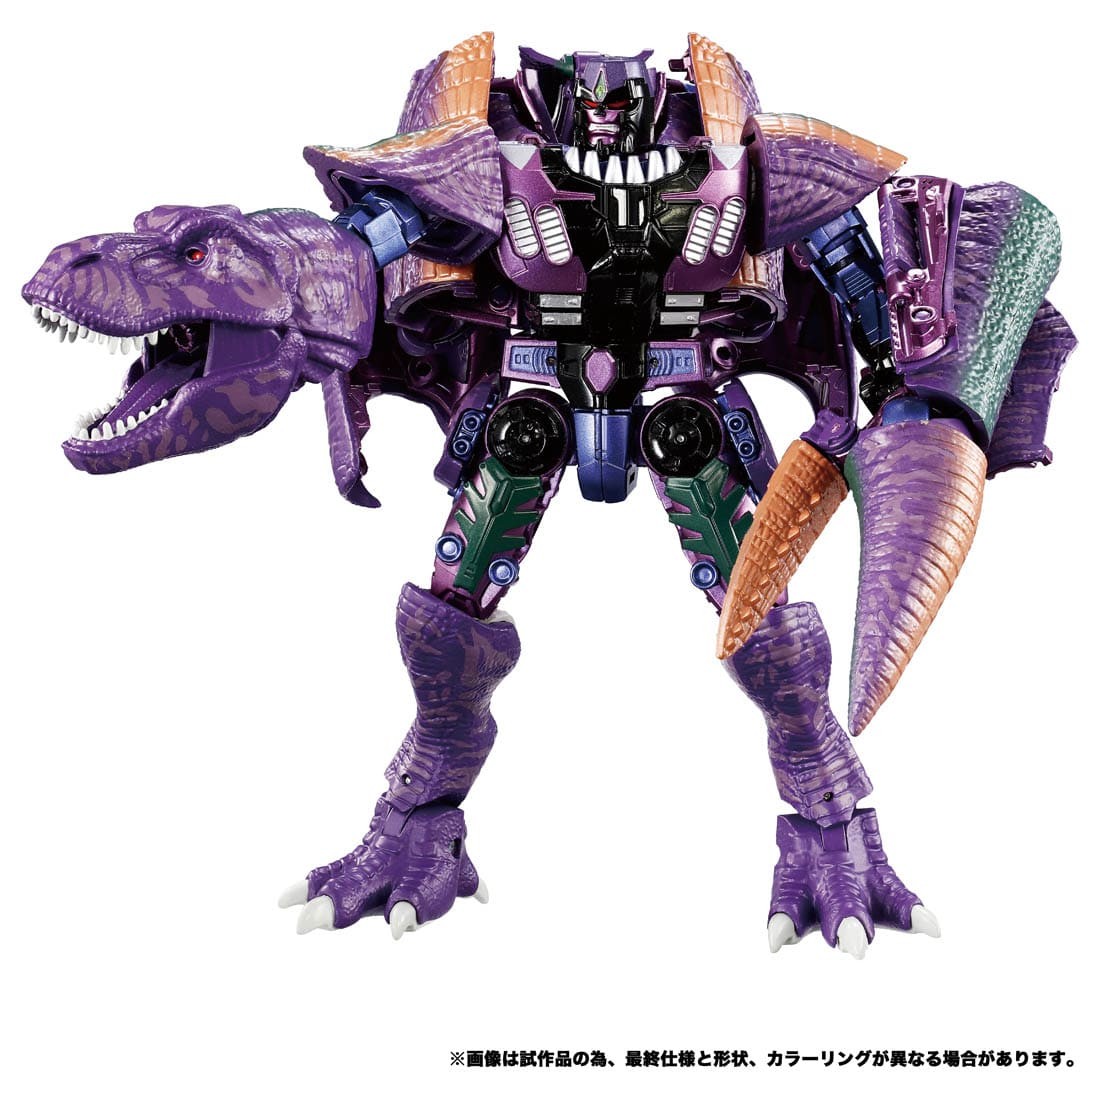 Transformers News: Takara Tomy Announces Beast Wars VS Series and Select Episodes Returning to Broadcast in Japan